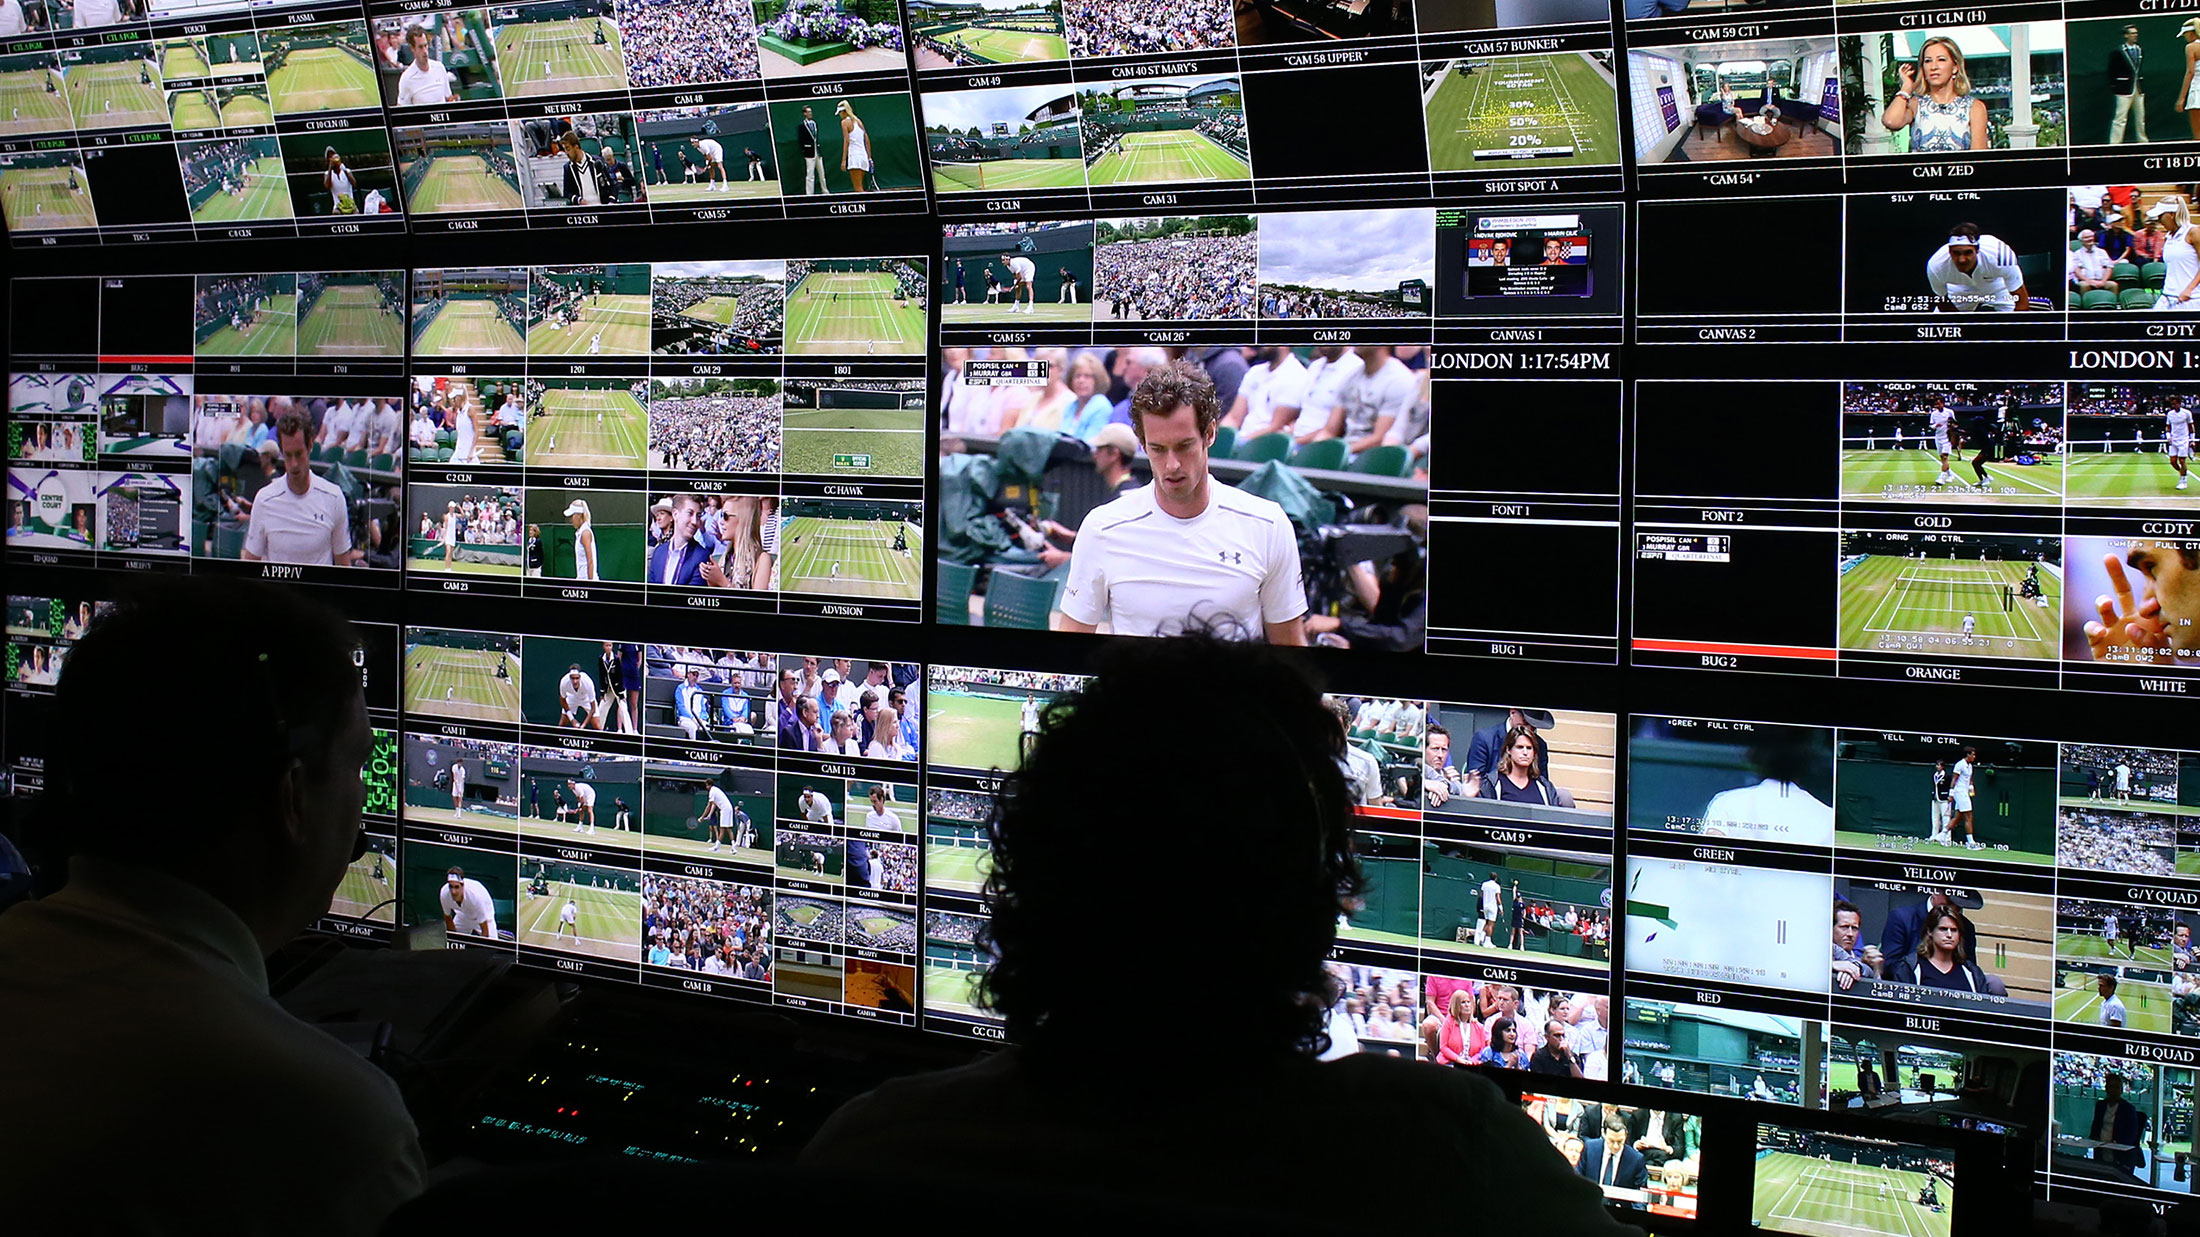 Production staff view screens in an ESPN operation room on day 9 of the Wimbledon Lawn Tennis Championships at the All England Lawn Tennis and Croquet Club on July 8, 2015 in London.
